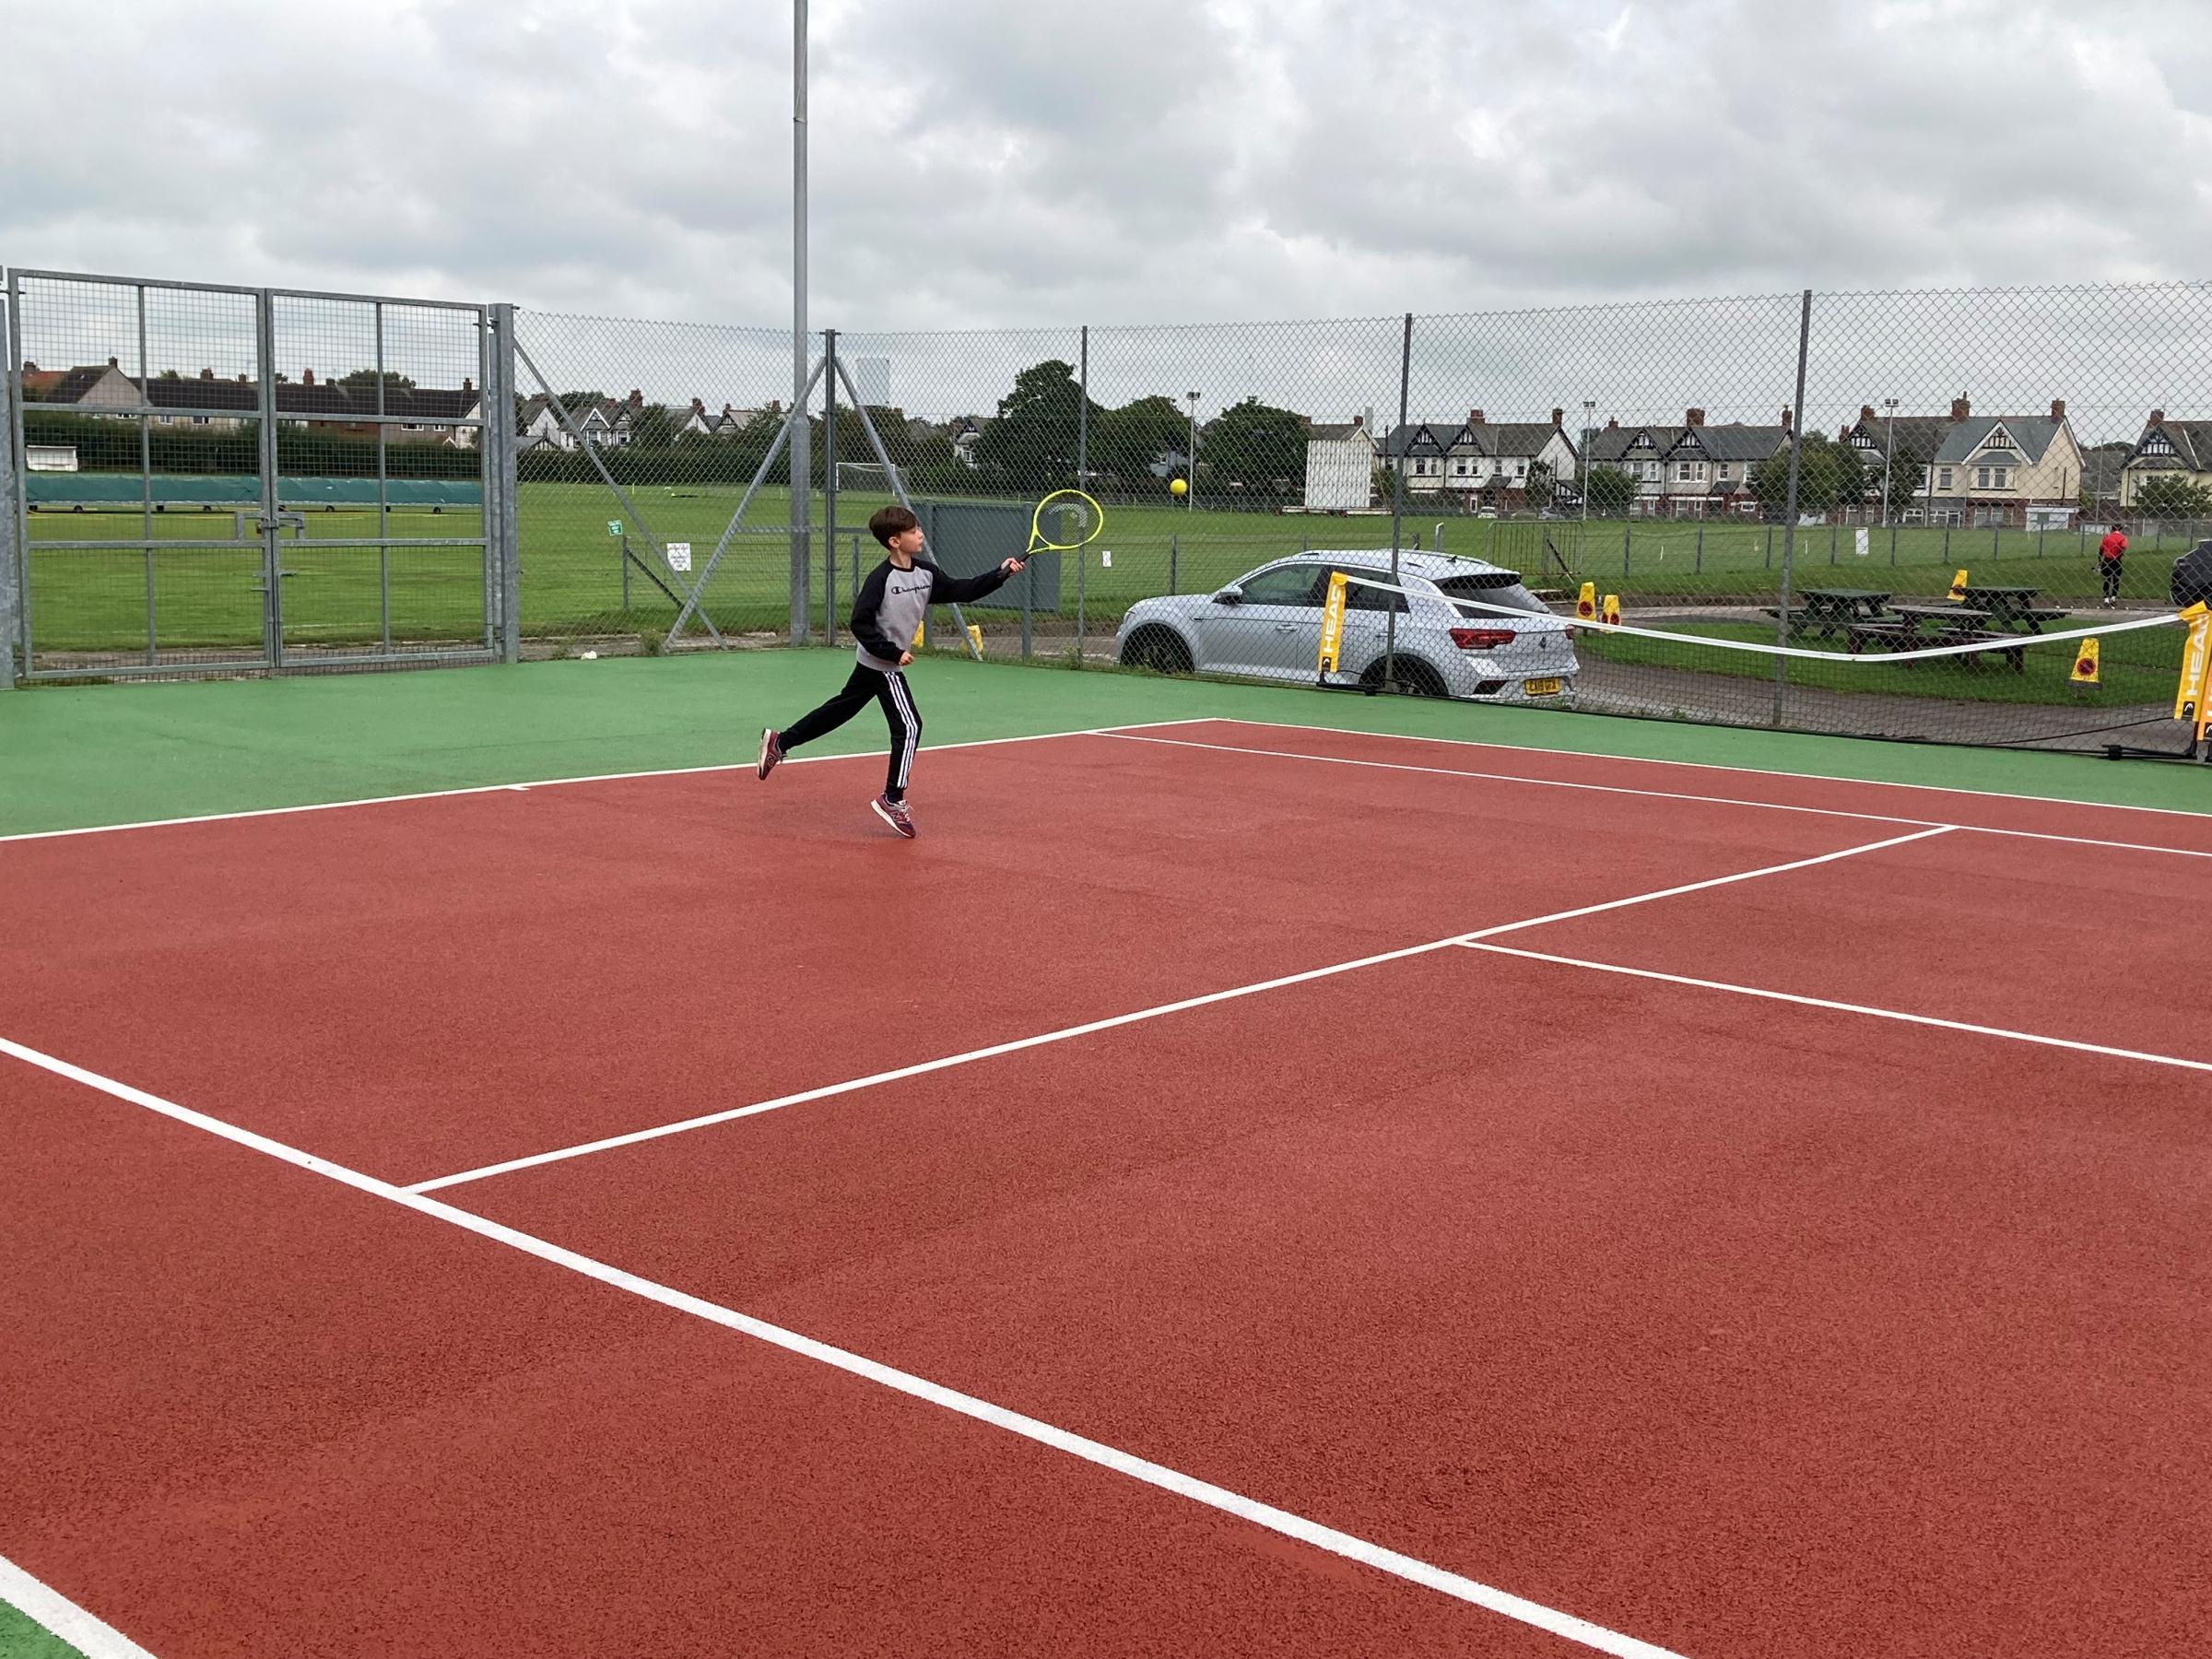 AIR: Hughie Ward playing the approach shot on Hawcoat Parks newly opened tennis courts